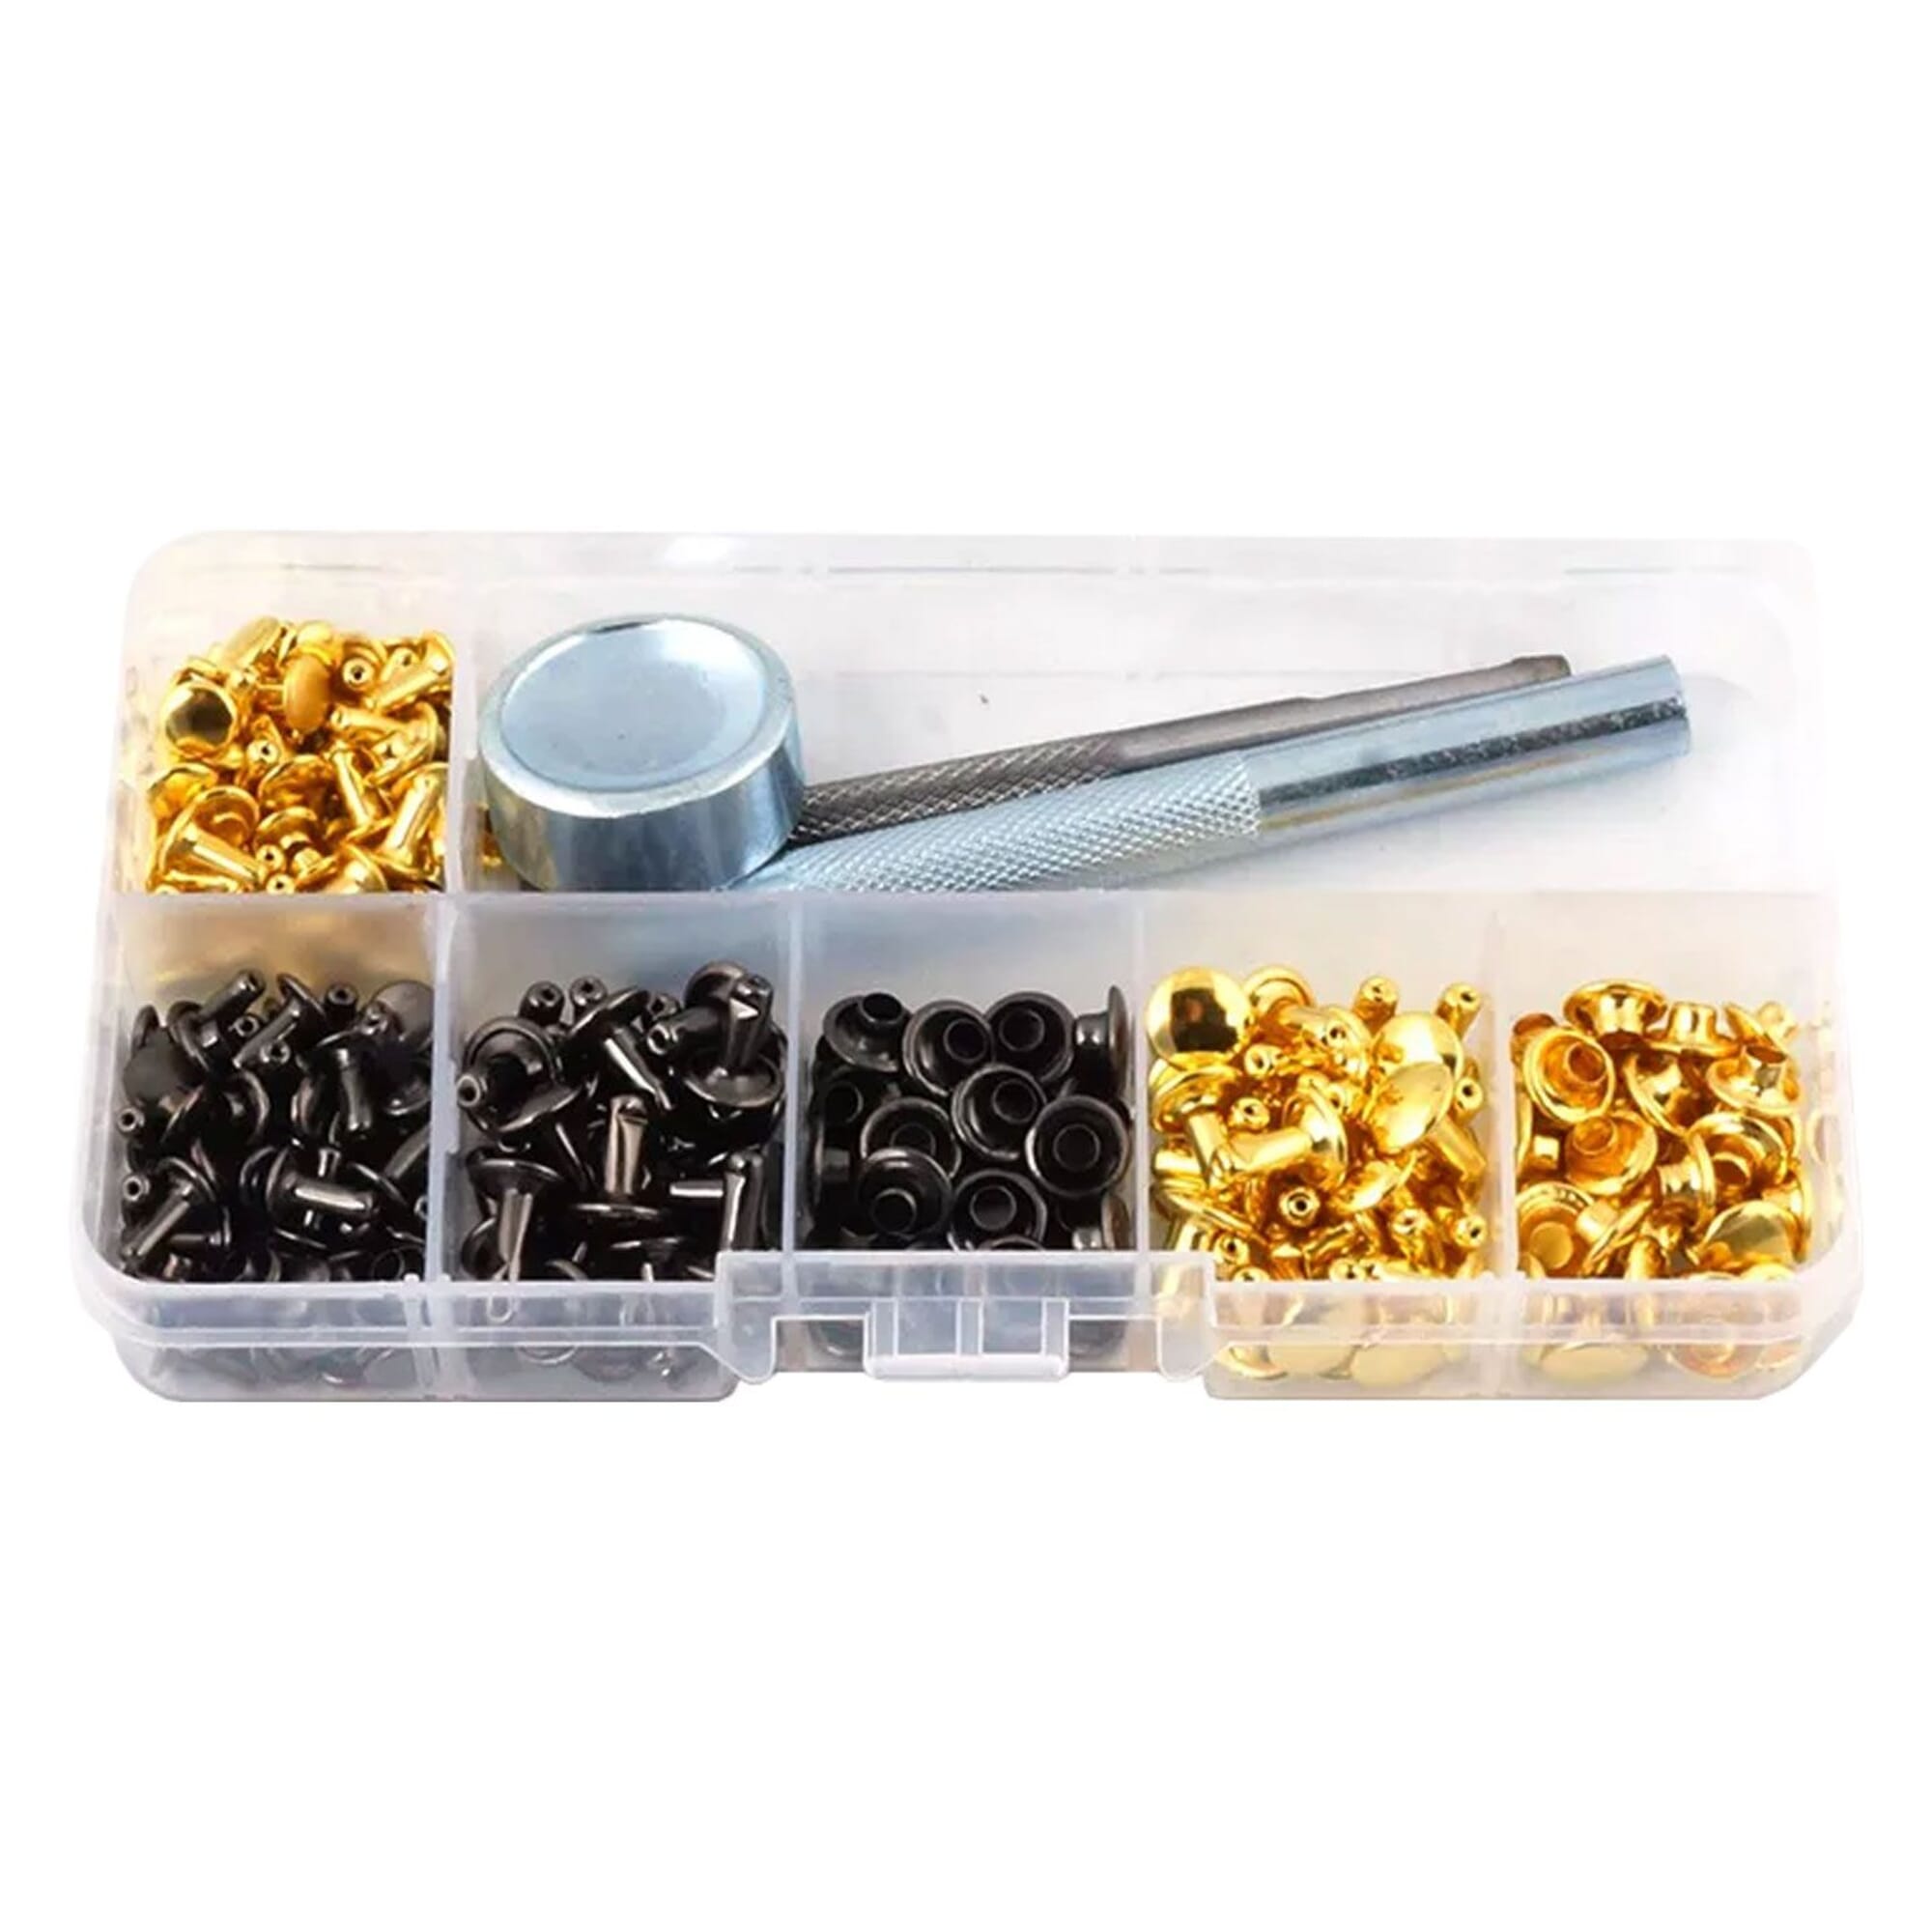 Leather Rivet Tool Set Rivets For Leather Work Brass Rivets Leather UK –  SnapS Tools